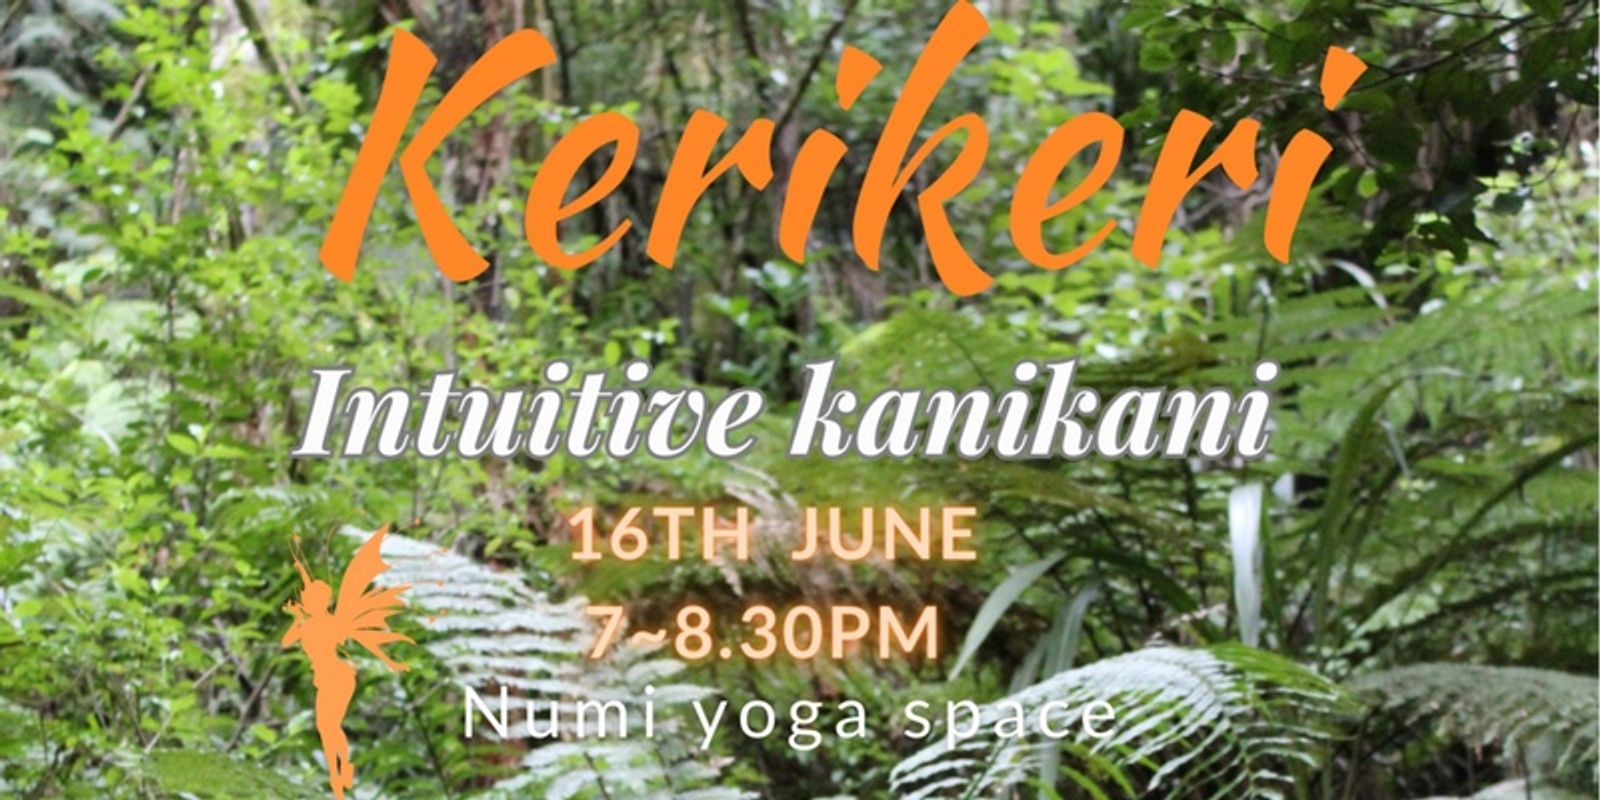 Banner image for Intuitive kanikani experience